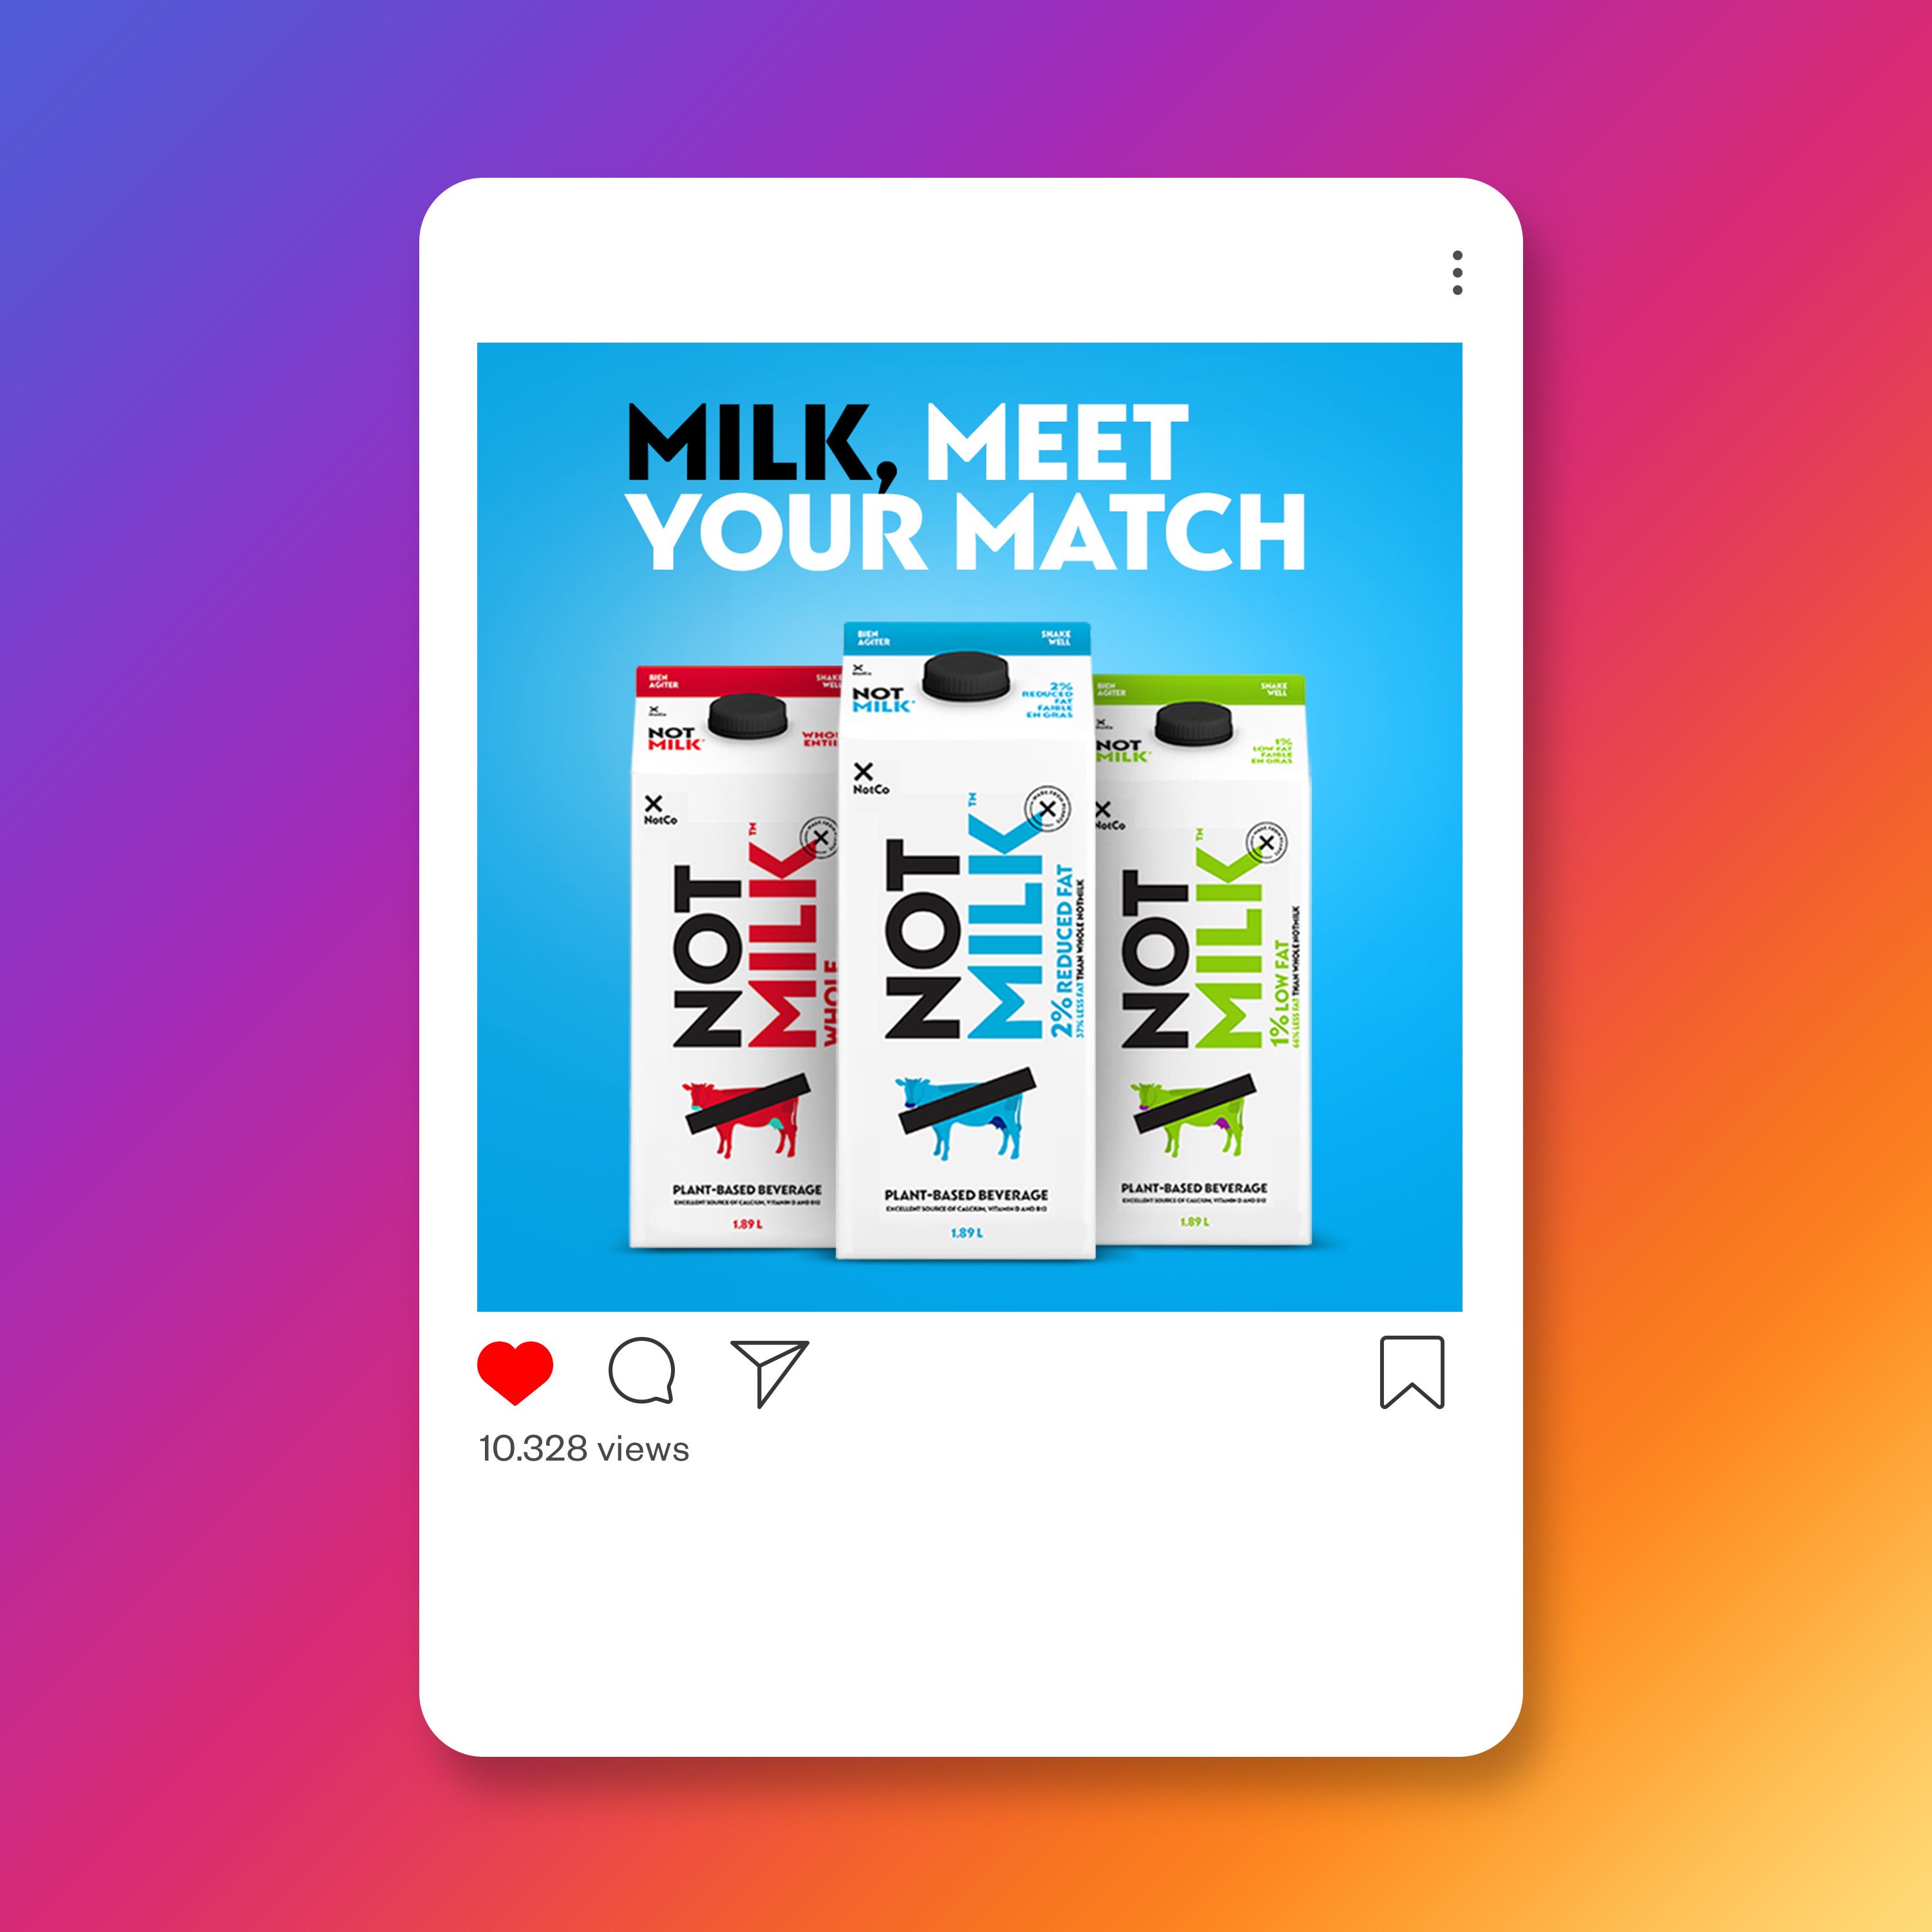 An example of Instagram ad for NotMilk showing the product line